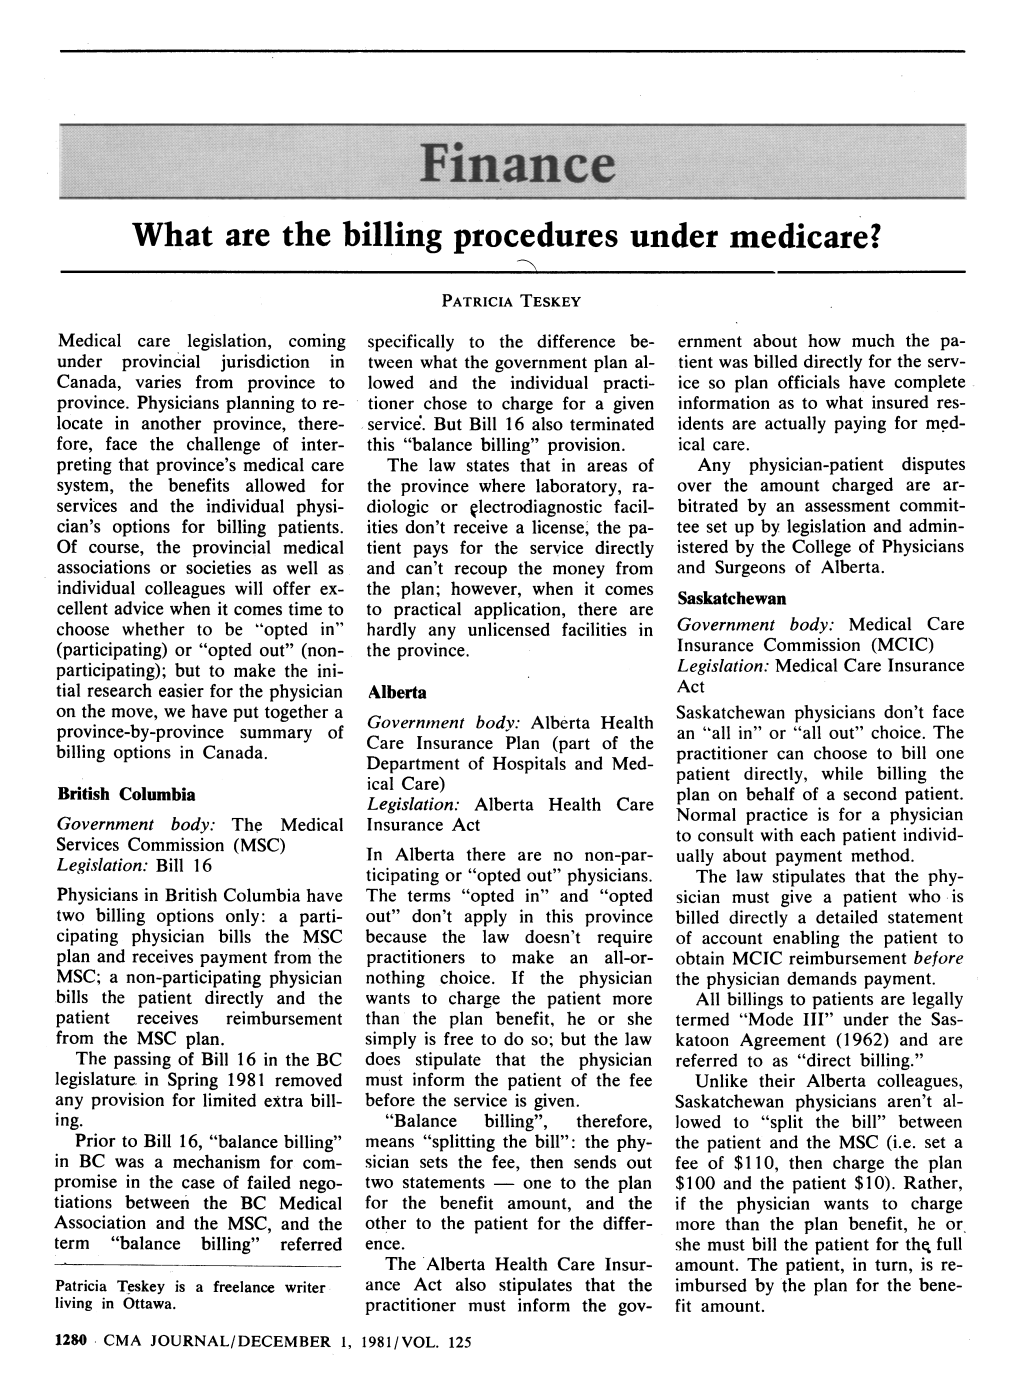 What Are the Billing Procedures Under Medicare?